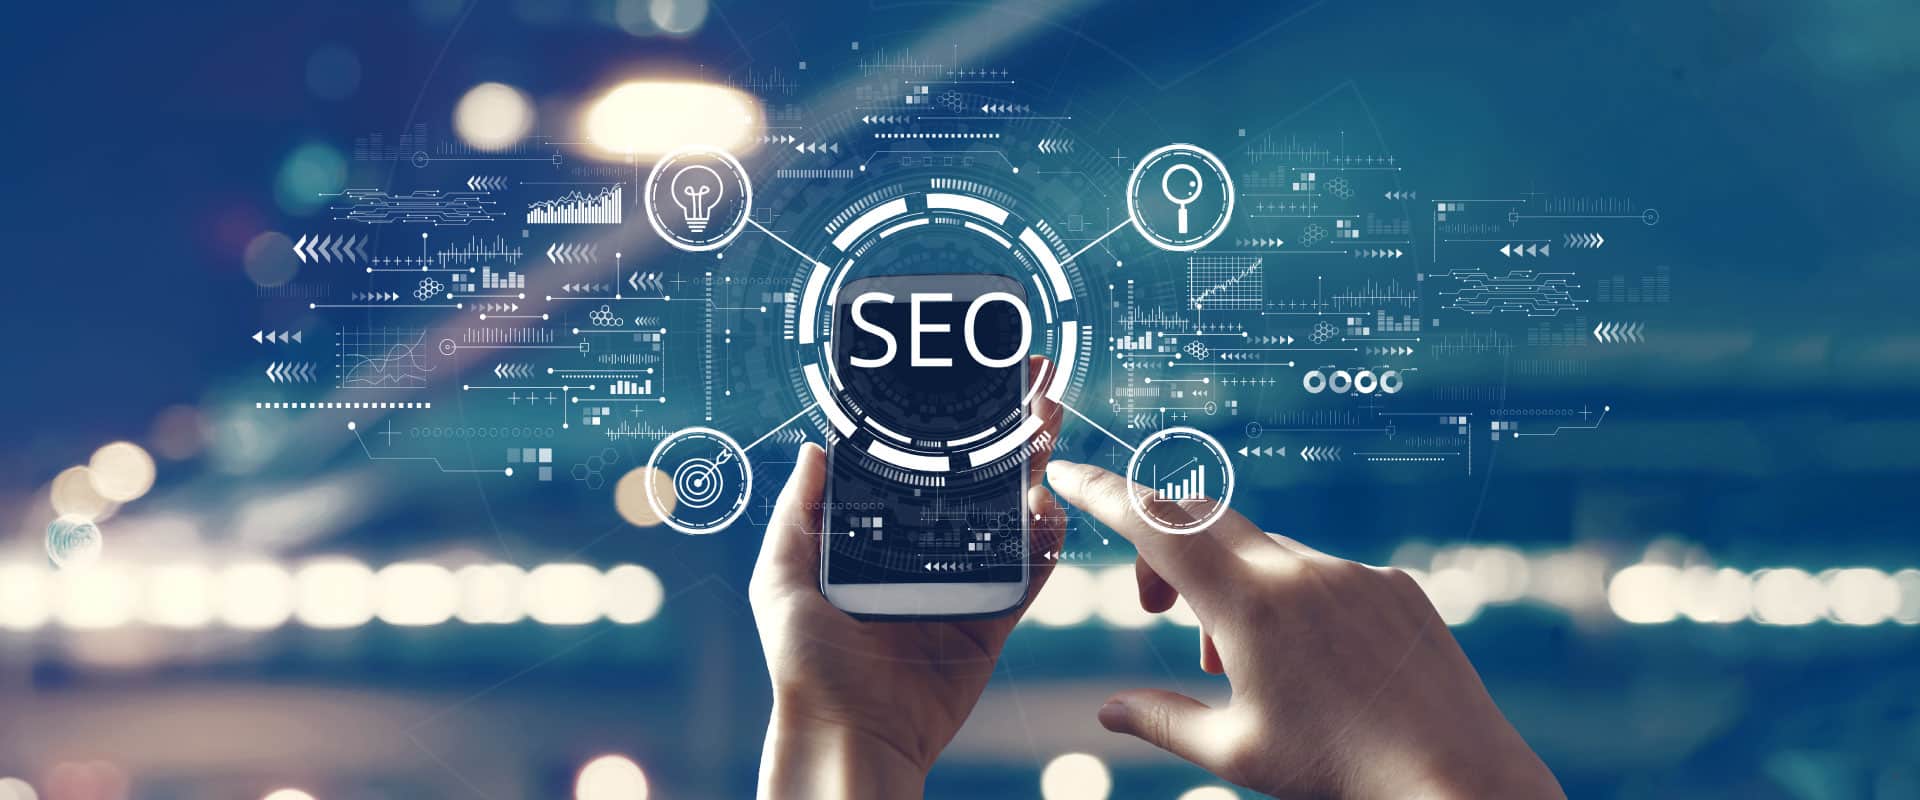 Why SEO Is Crucial - CICOR Marketing